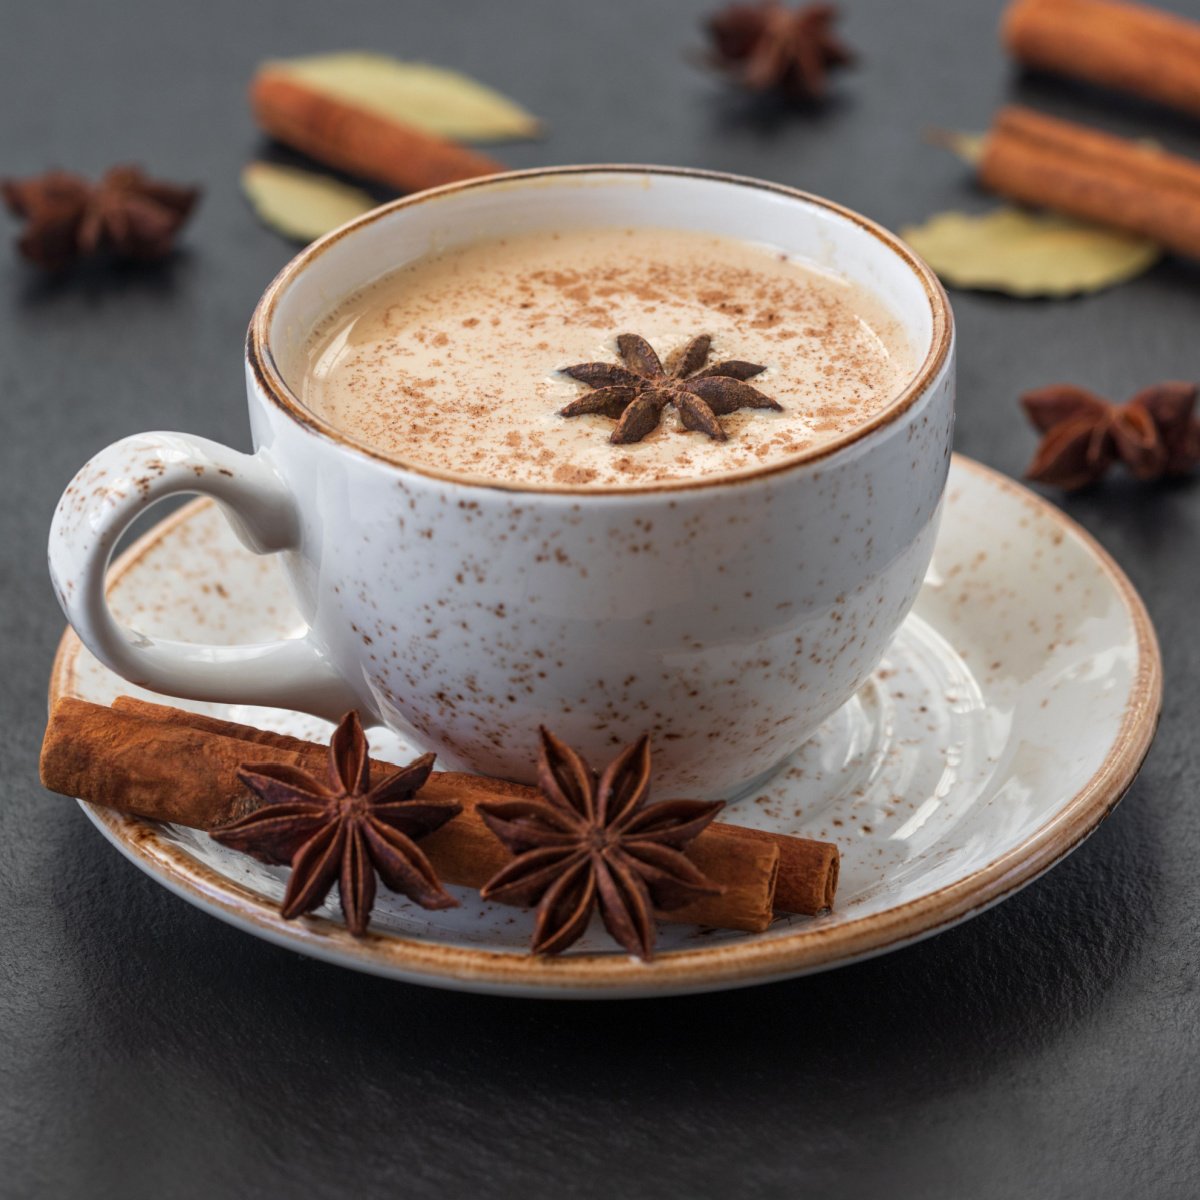 cup of indian masala chai tea on saucer with various spices scattered on table